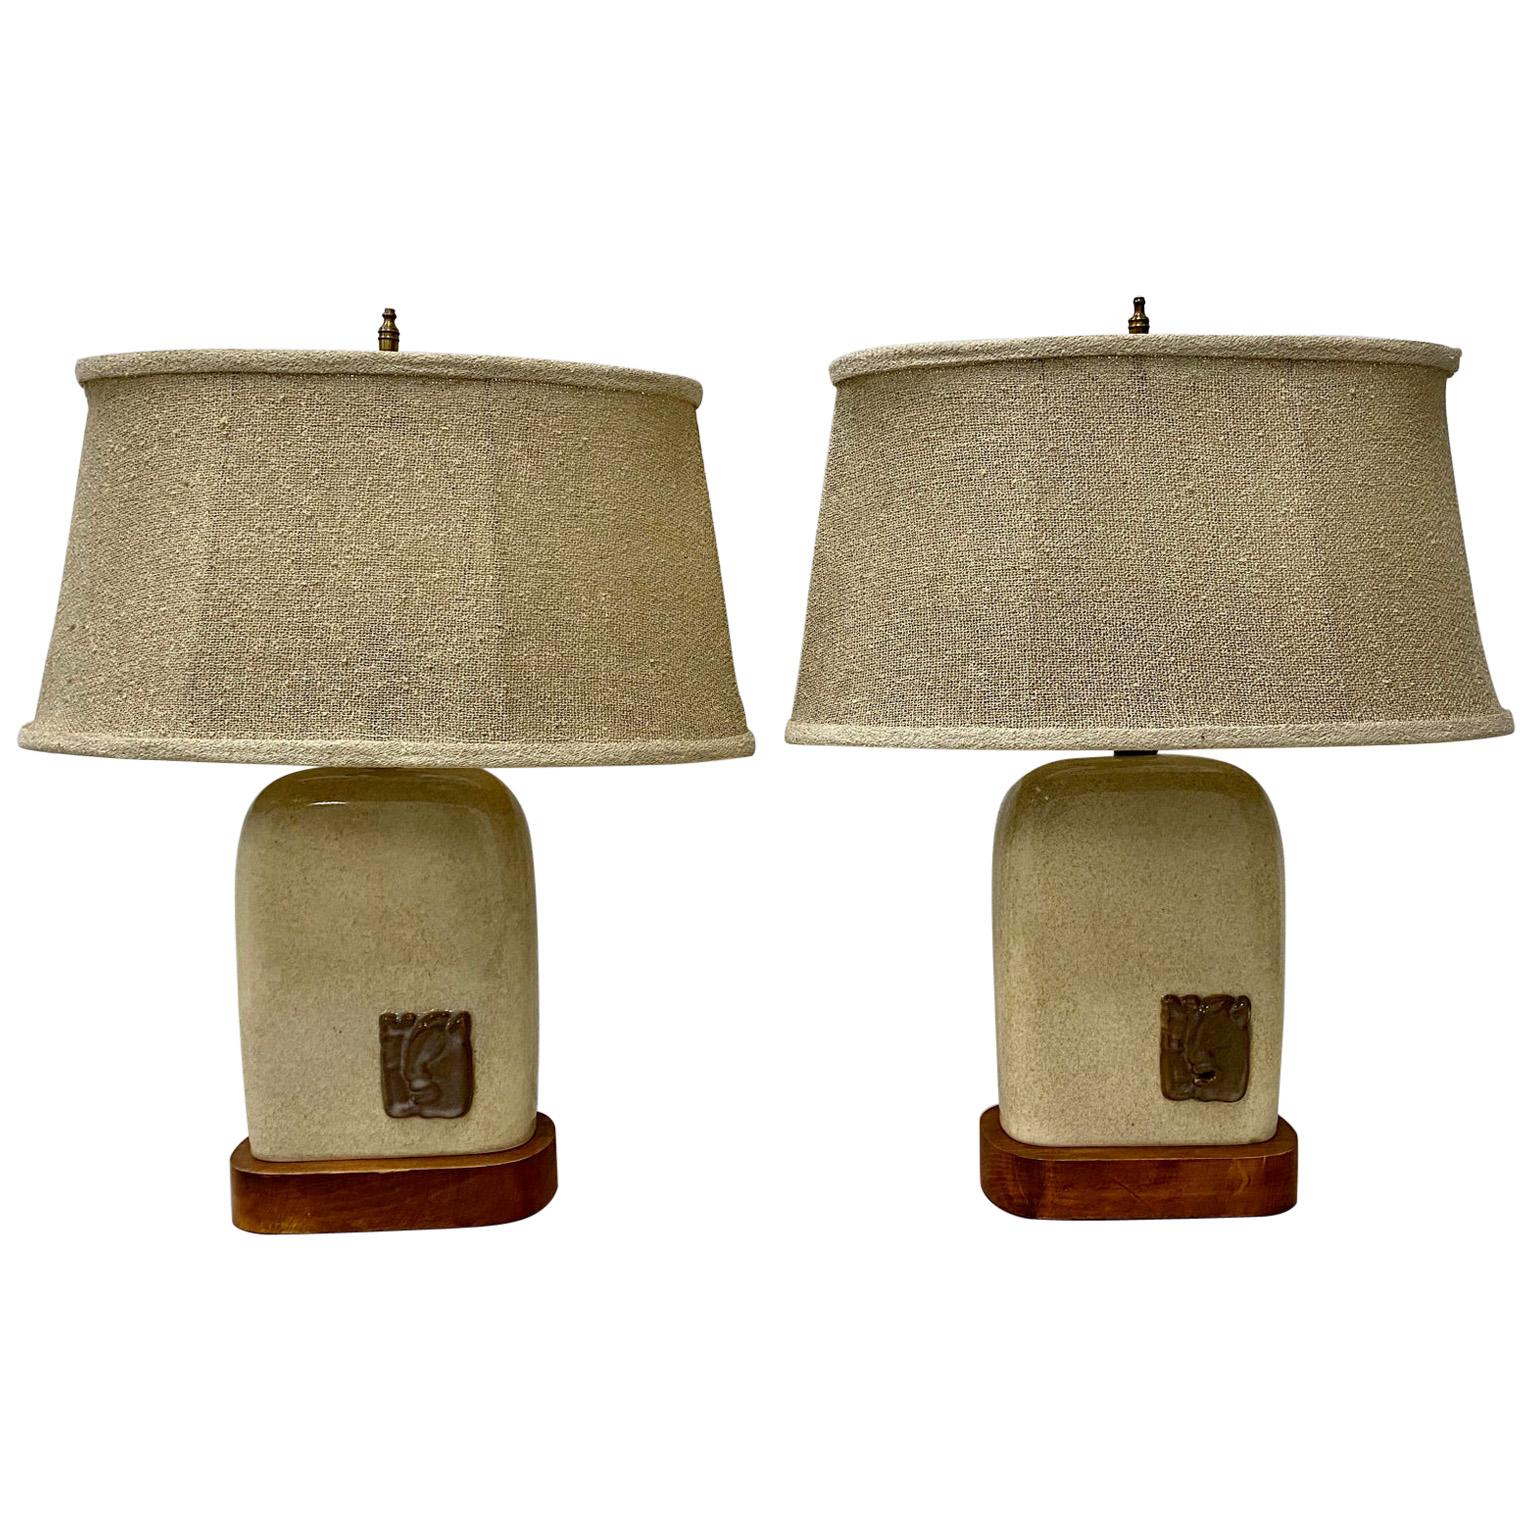 Pair of Vintage Glazed Ceramic Lamps with Mayan Inspired Ceramic Medallions